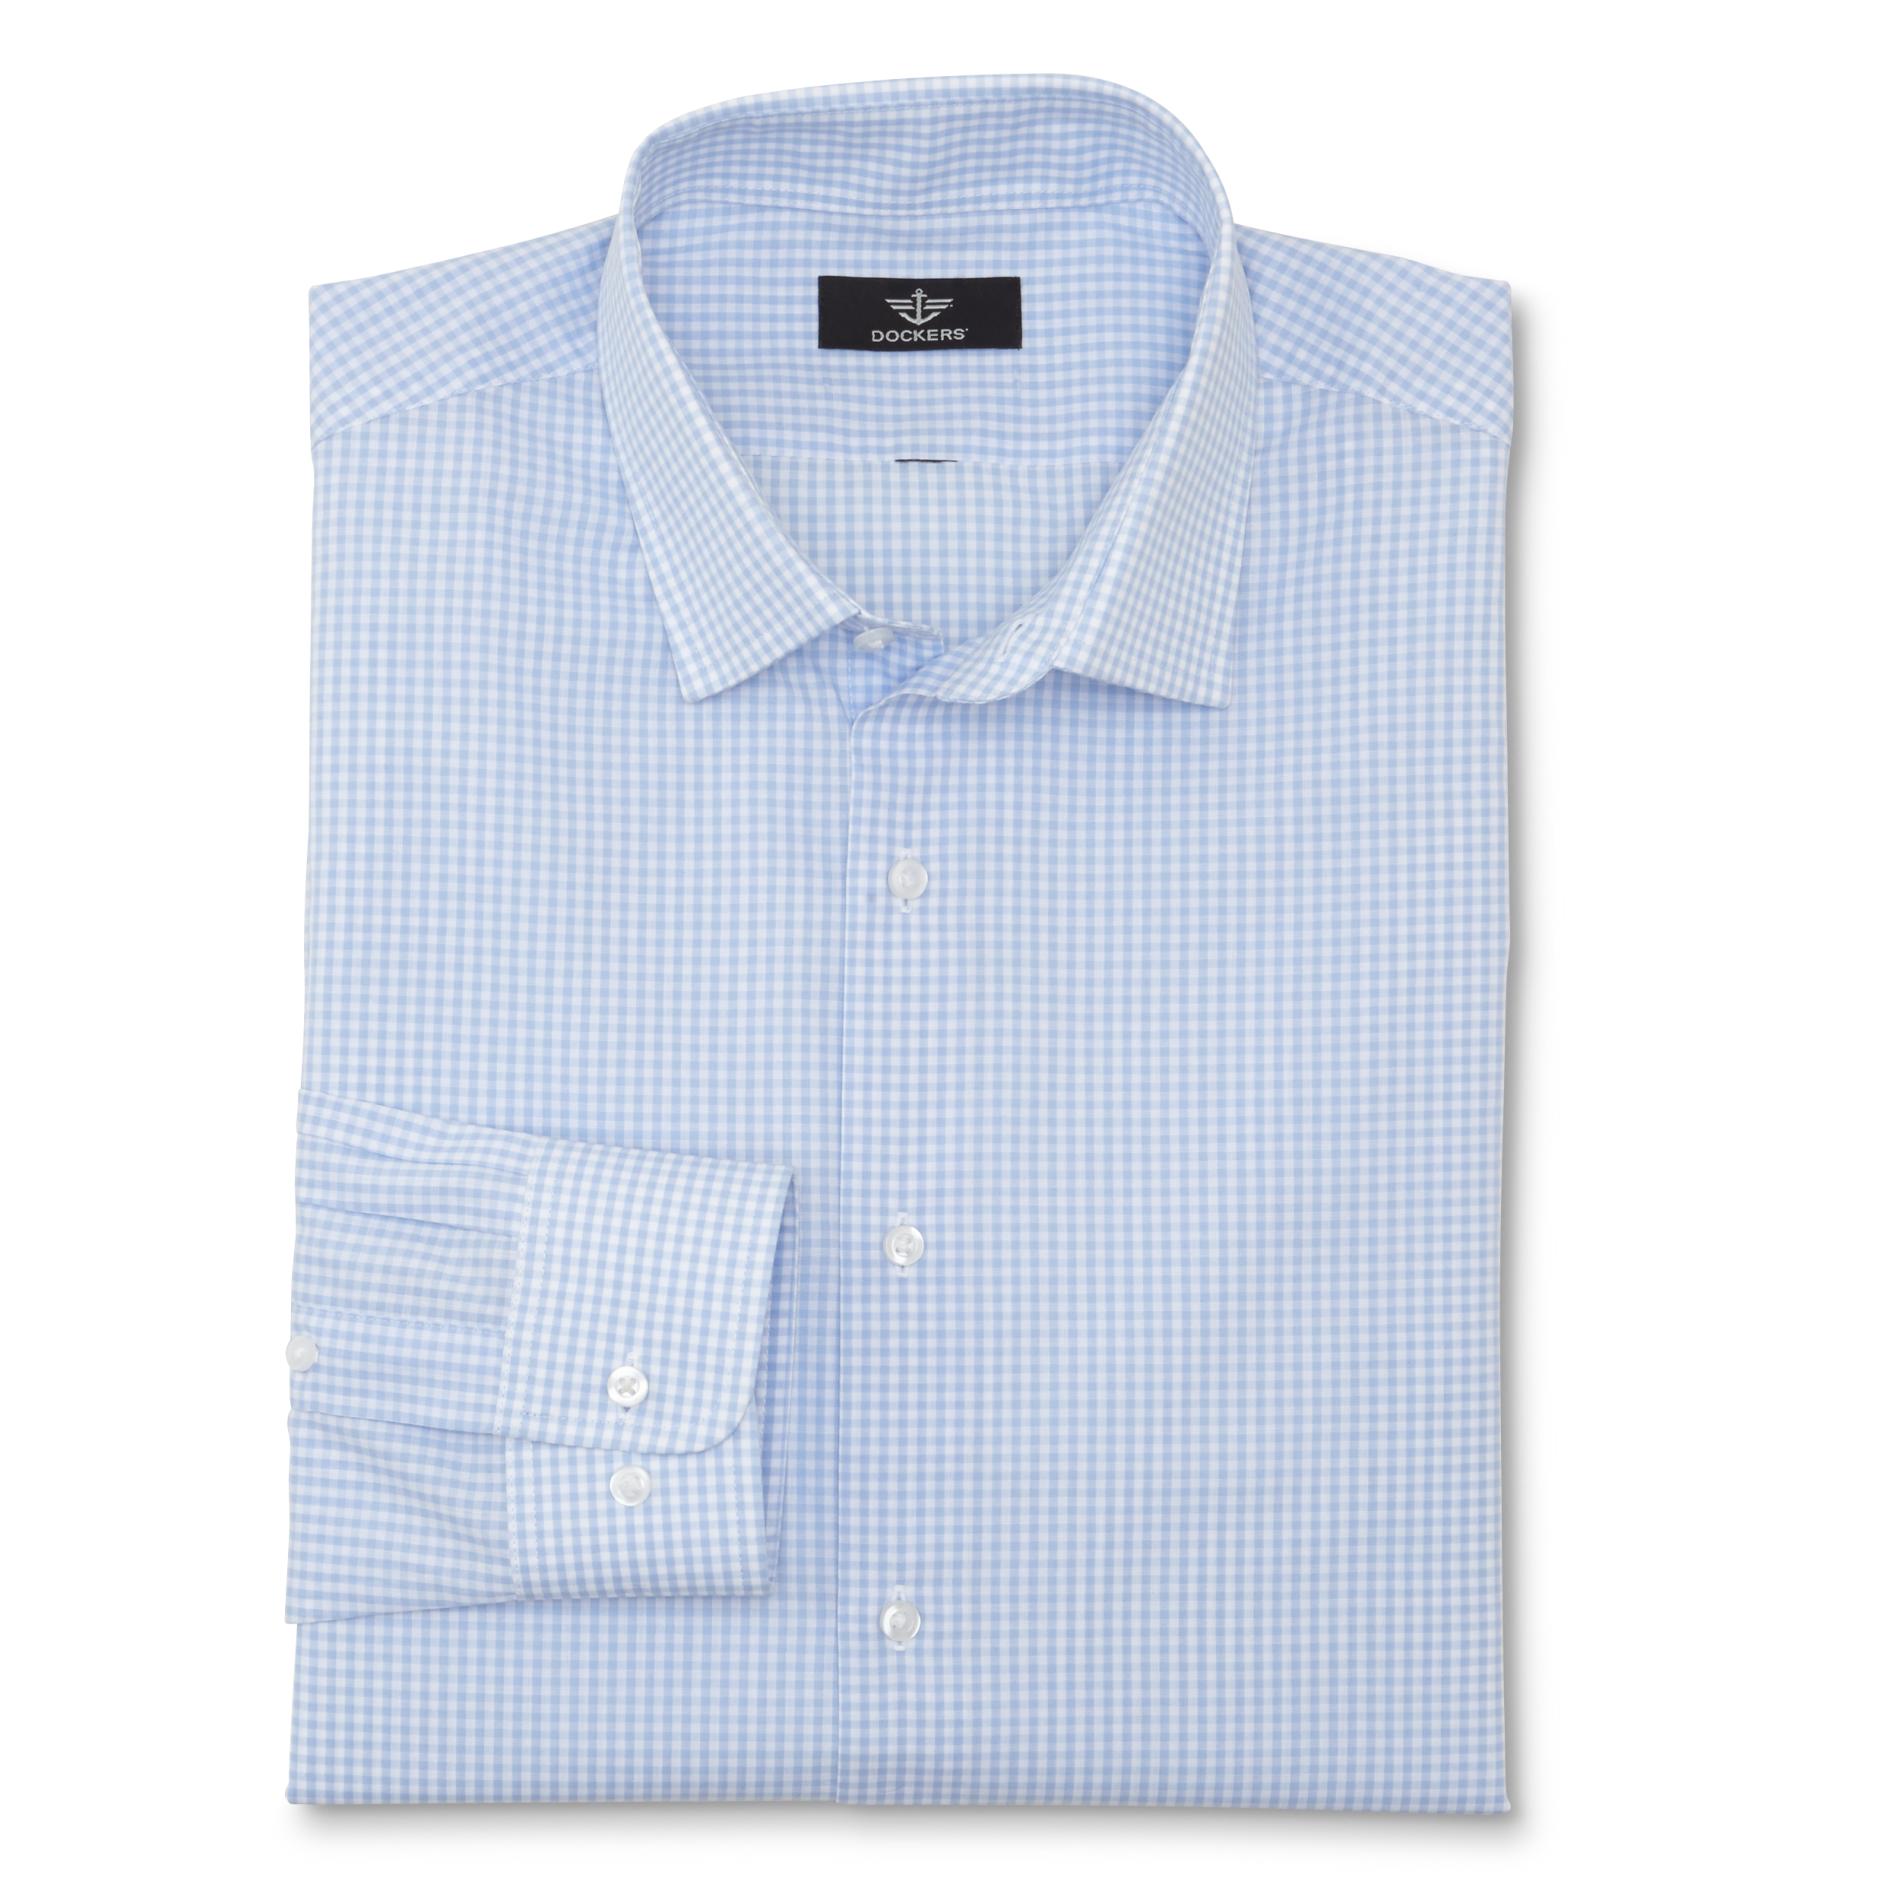 Dockers Men's Fitted Dress Shirt - Gingham Check